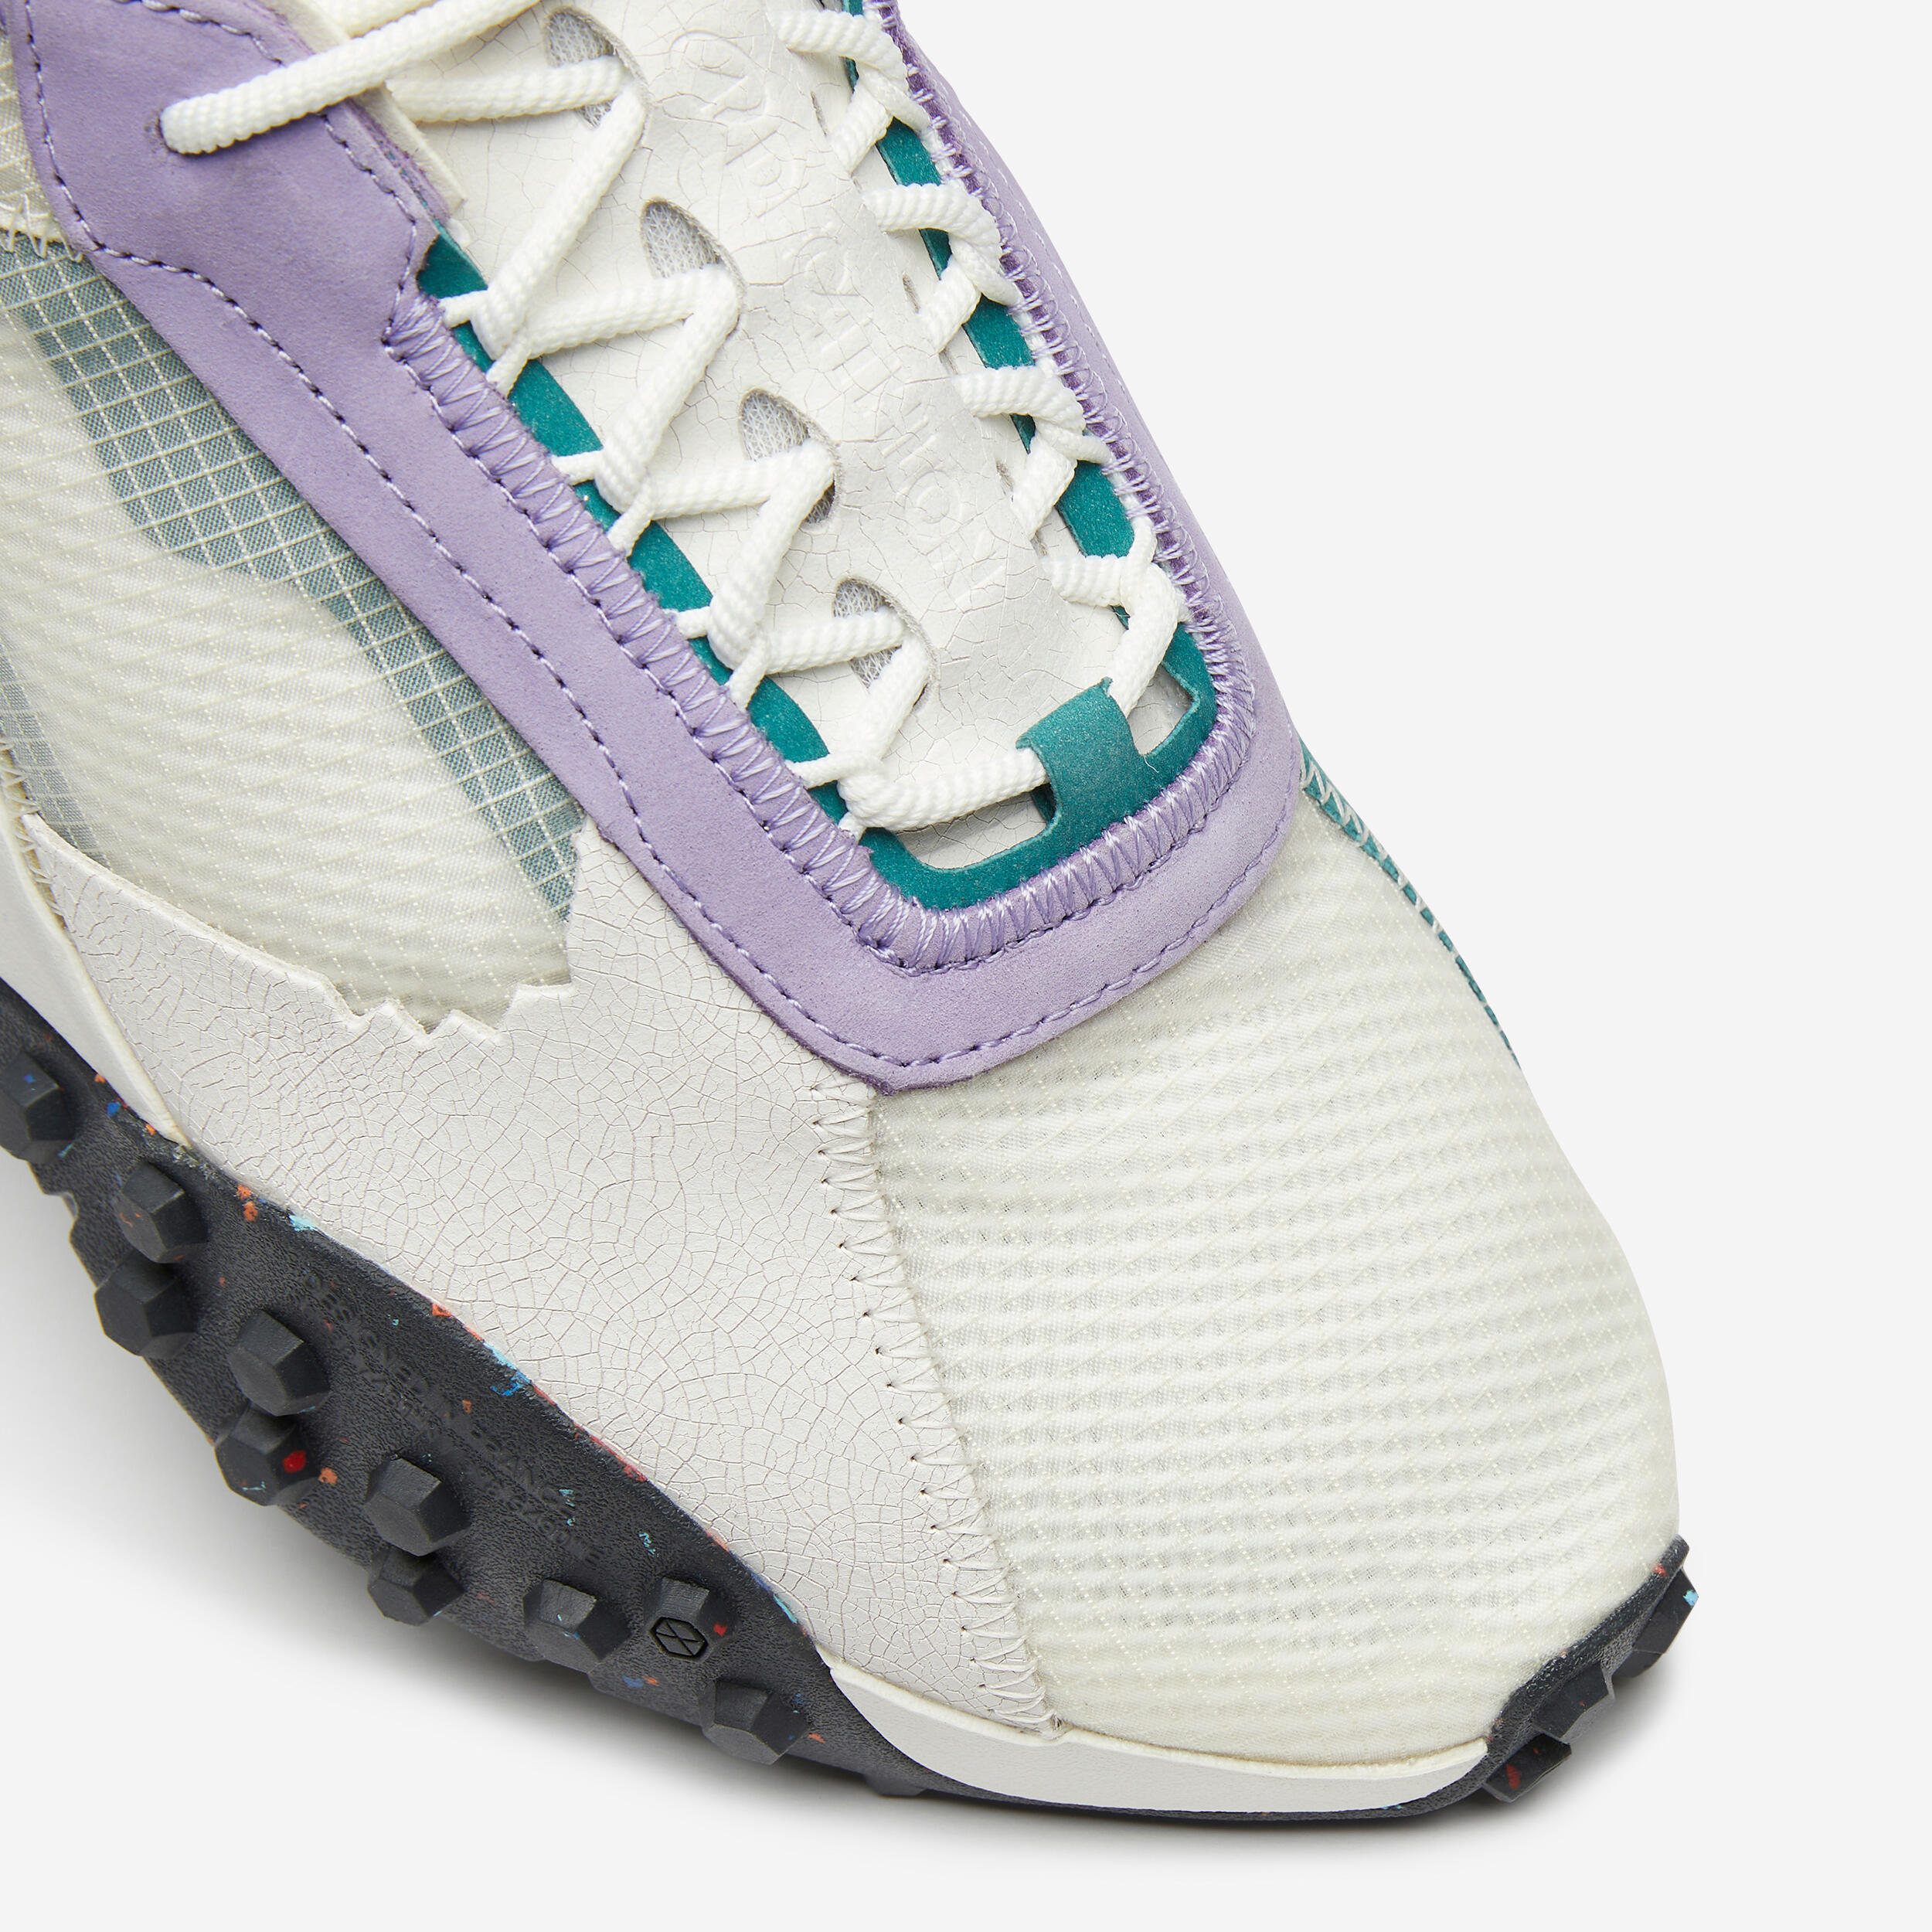 WLKR 76 Trainers-White and Purple 3/12